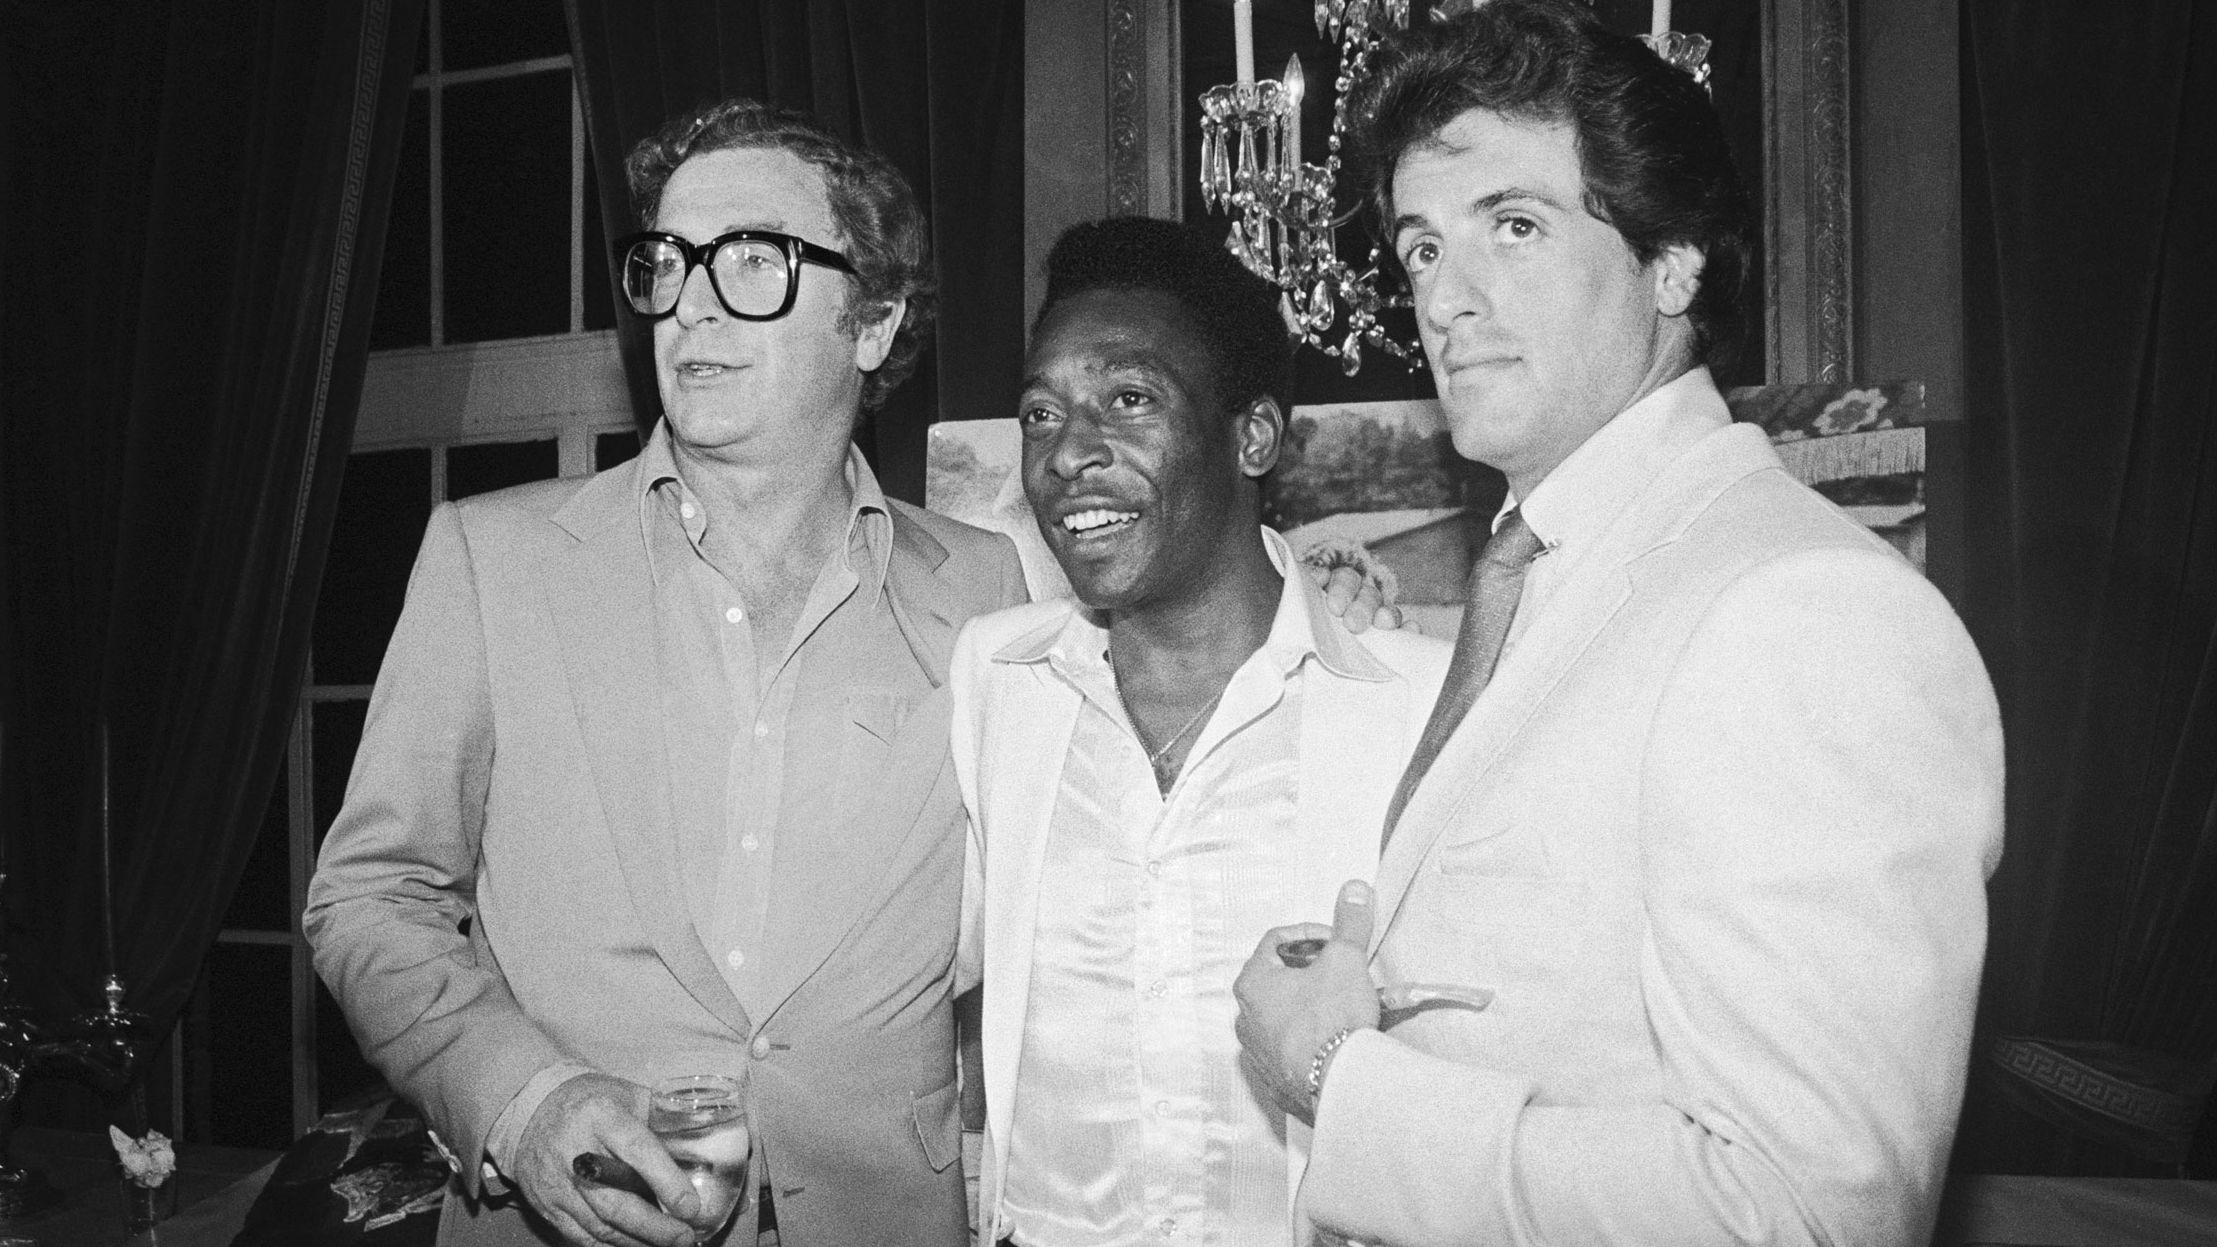 Pelé attends a party with actors Michael Caine, left, and Sylvester Stallone. The three starred together in the 1981 film "Escape to Victory."